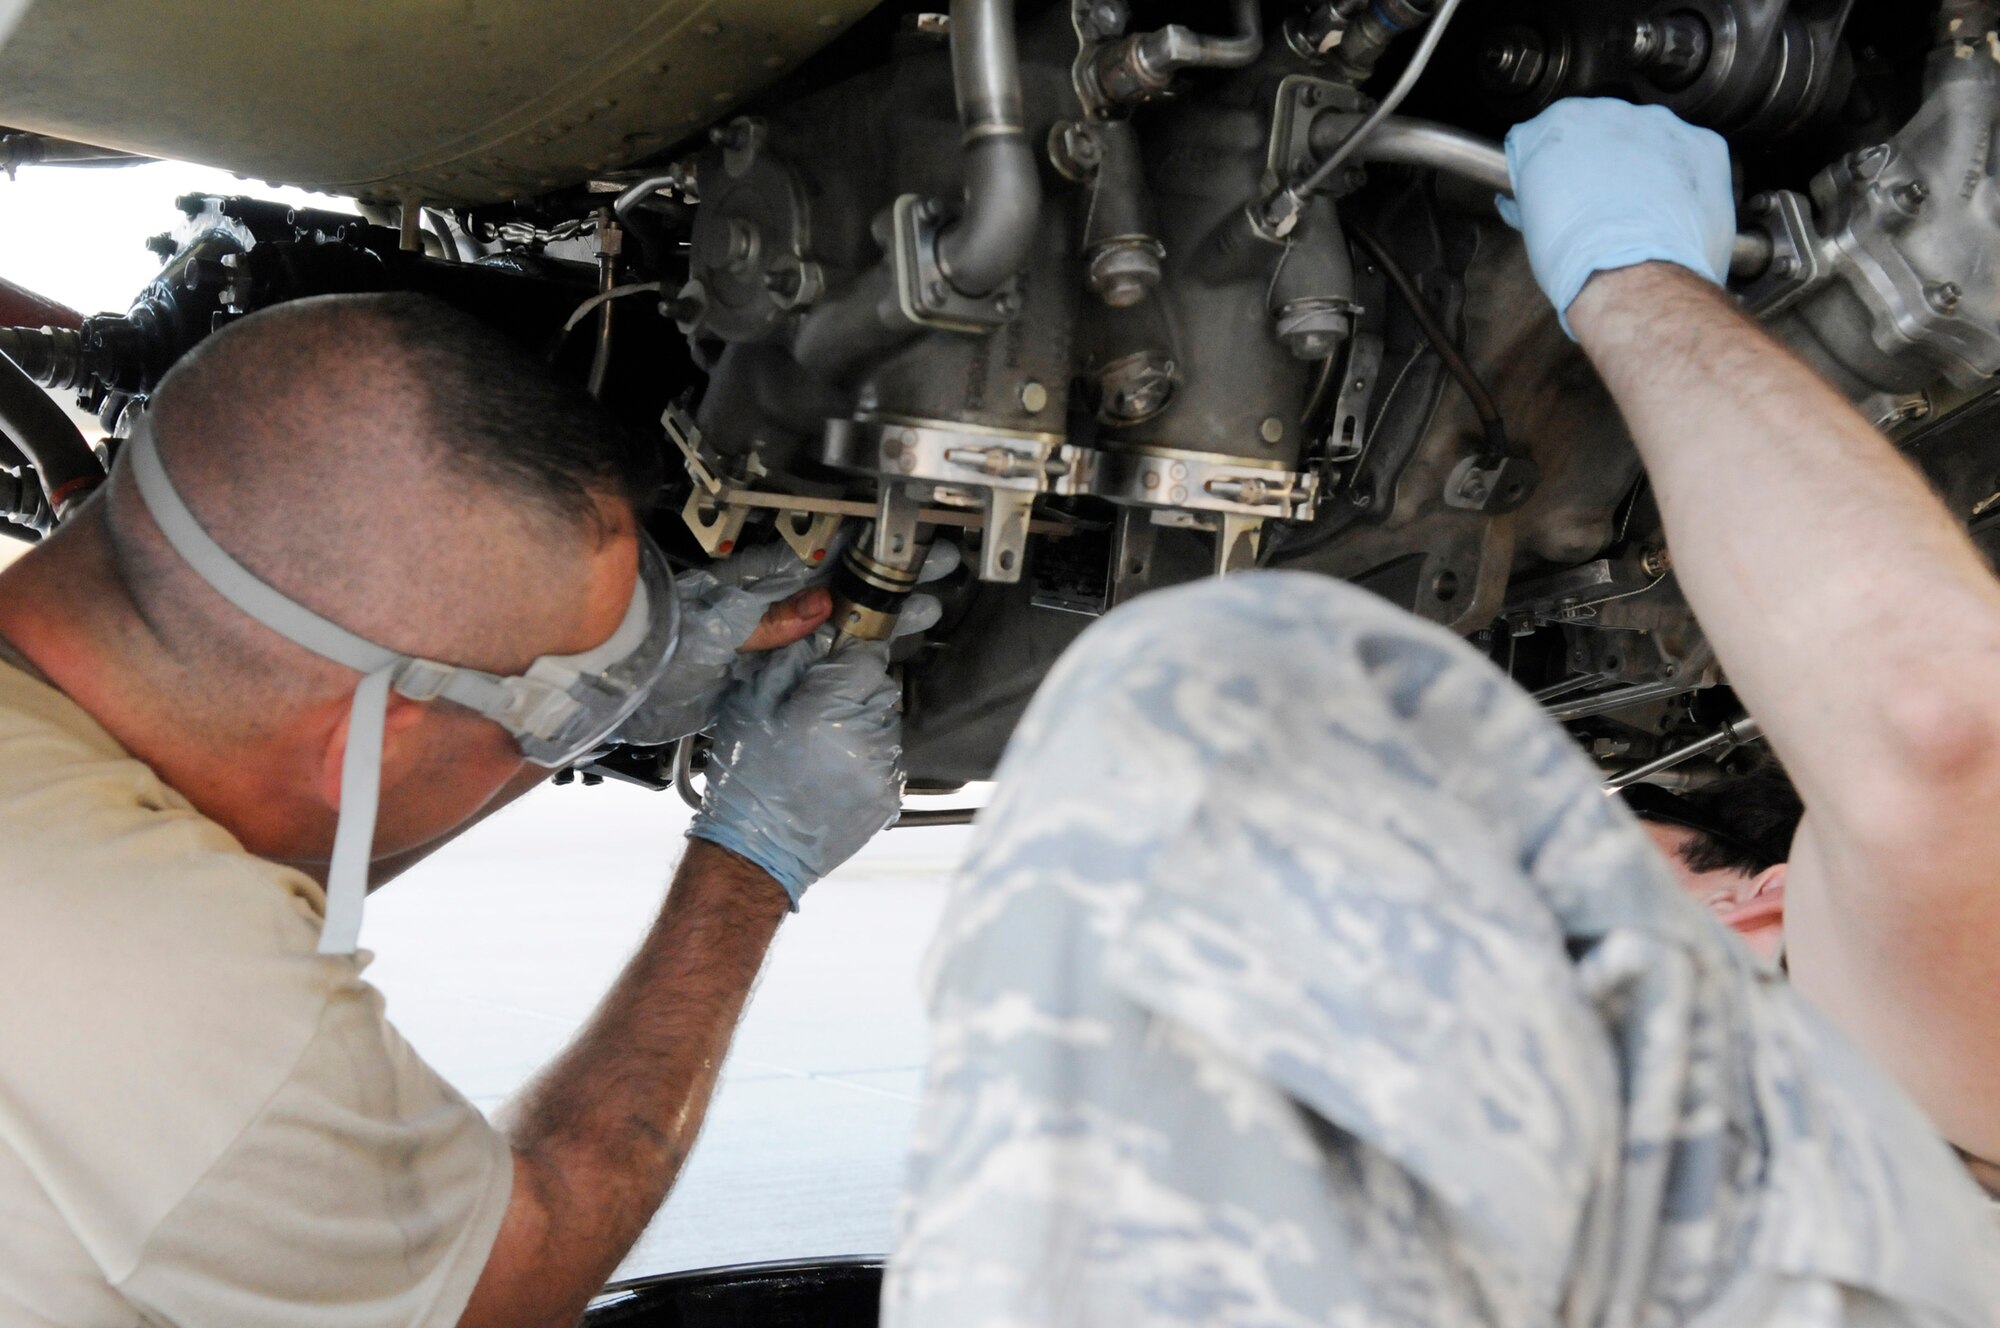 Staff Sgt. Eric Mutschlechner, 379th Expeditionary Aircraft Maintenance Squadron, replaces an engine magnetic chip during a 60-hour inspection on a KC-135 Stratotanker engine, Nov. 20, at an undisclosed air base in Southwest Asia.   The KC-135 Stratotanker provides the core aerial refueling capability for the United States Air Force and also provides aerial refueling support to Navy, Marine Corps and allied nation aircraft in the Central Command area of responsibility.  Sergeant Mutschlechner is a native of San Marcos, Texas, and is deployed from MacDill Air Force Base, Fla., in support of Operations Iraqi and Enduring Freedom and Joint Task Force-Horn of Africa.  (U.S. Air Force photo by Tech. Sgt. Michael Boquette/Released)